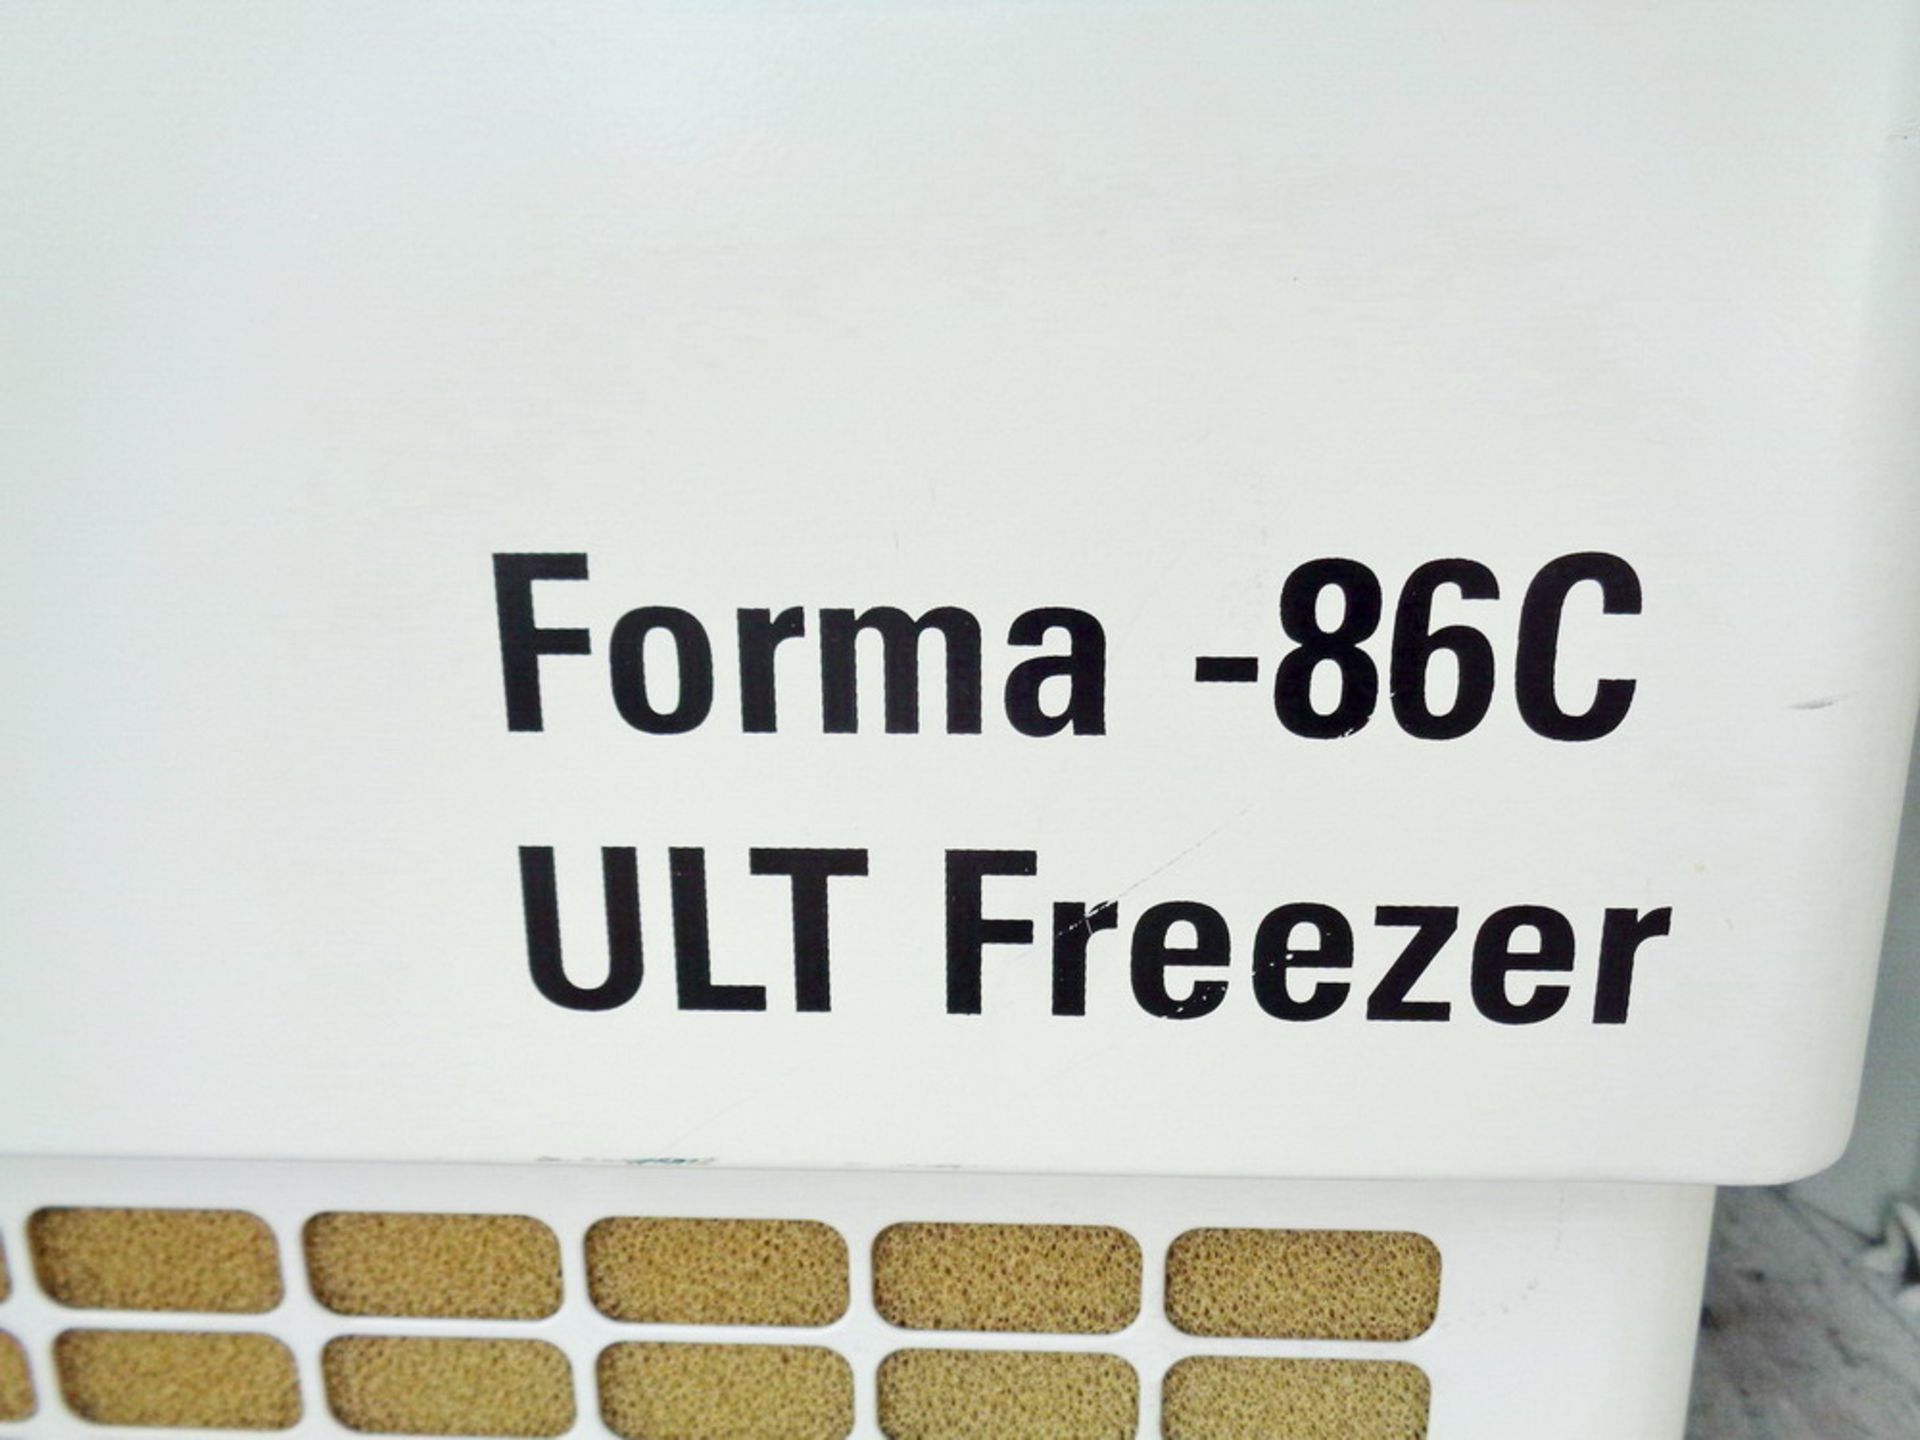 Thermo Electron Forma -86 degrees C ULT Freezer, Model 8606, S/N 806857-280 - Image 2 of 5